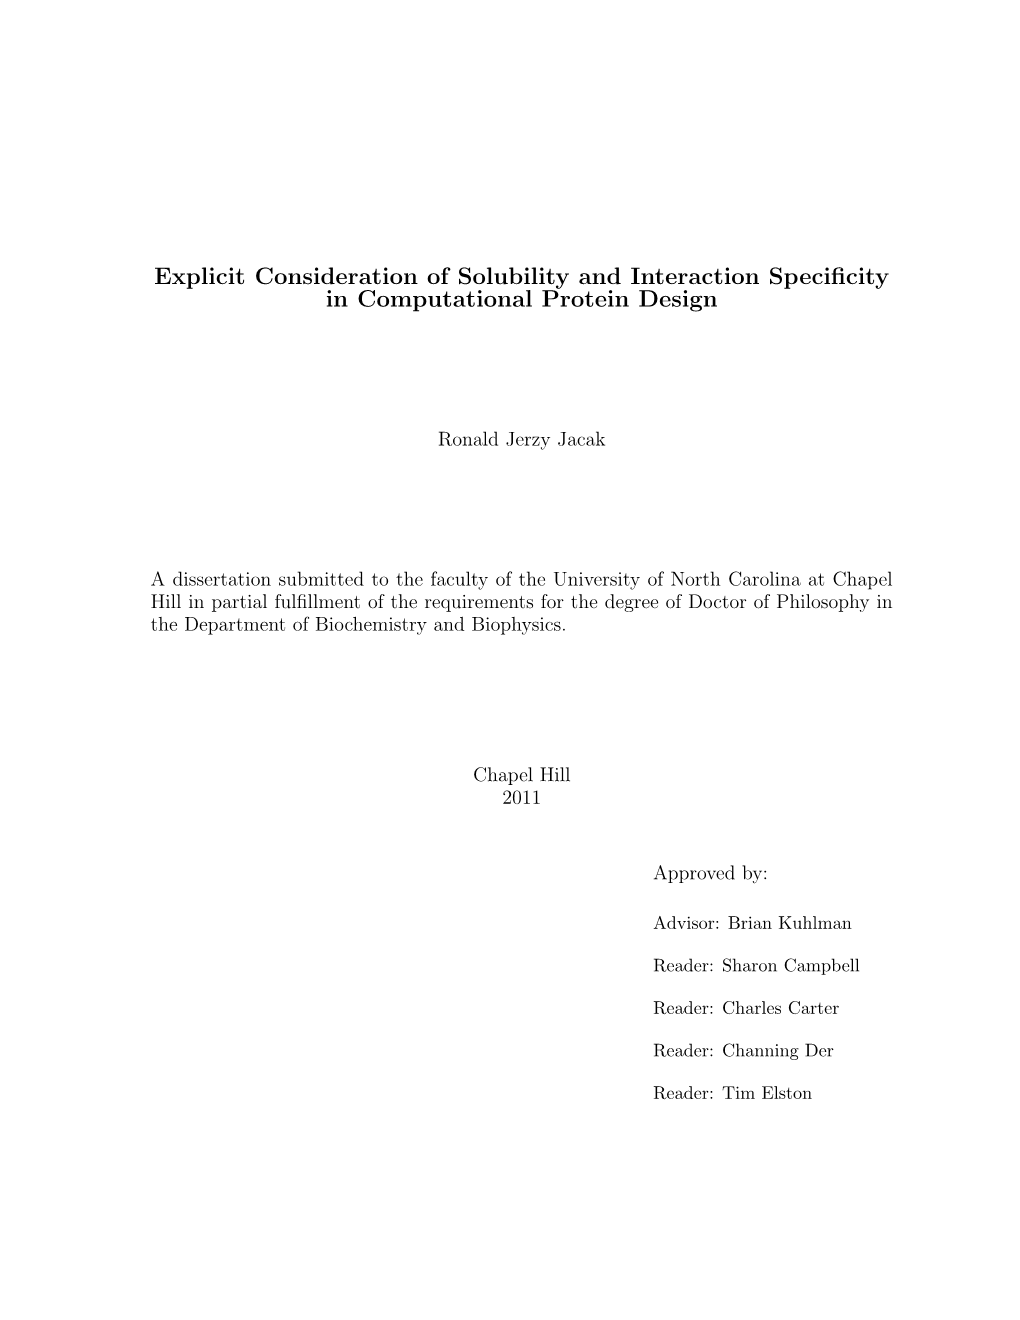 Explicit Consideration of Solubility and Interaction Specificity In